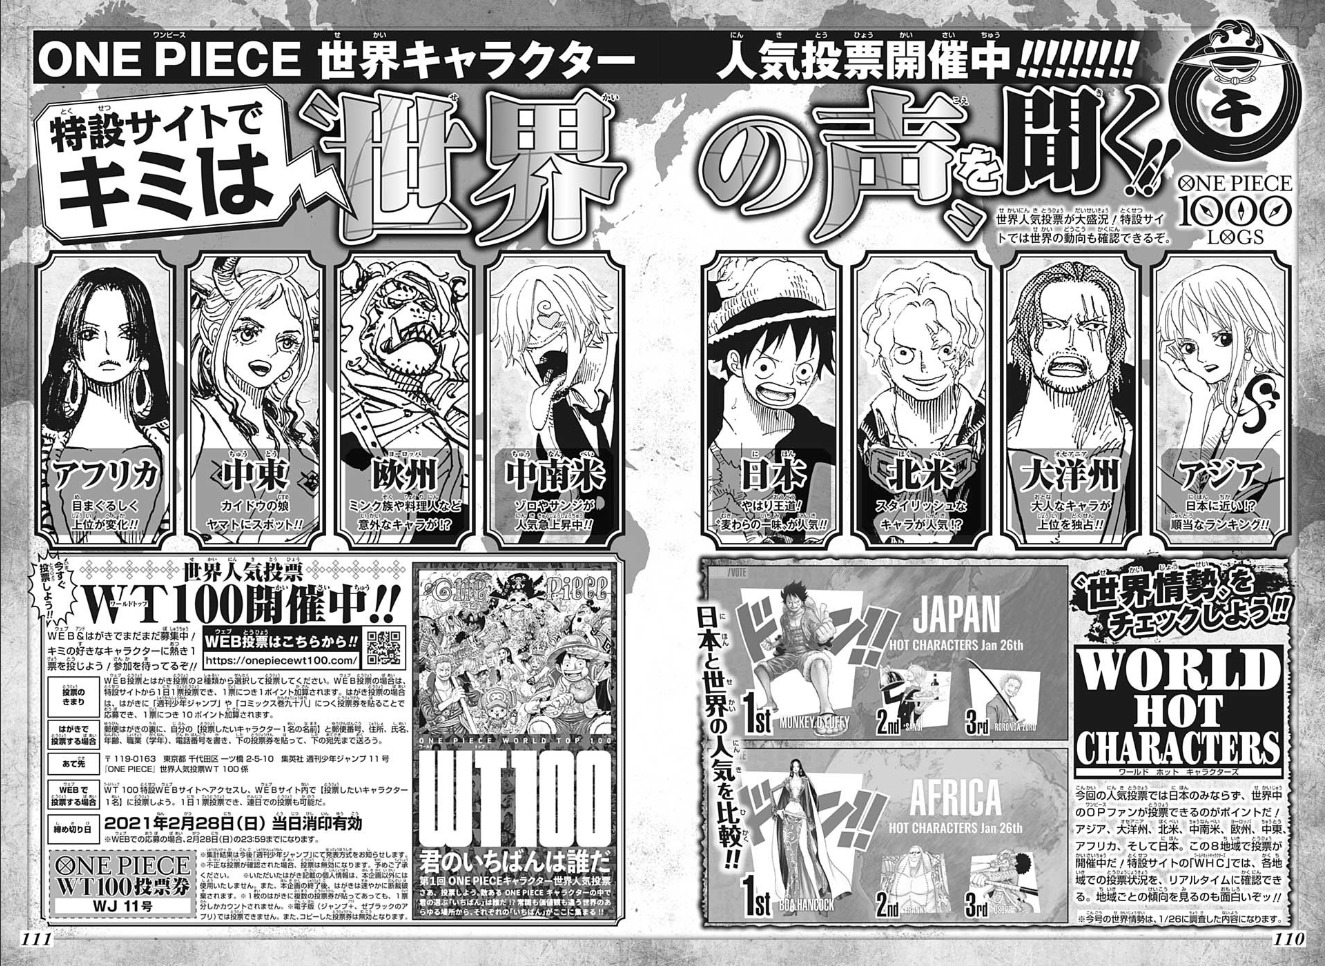 Shonen Jump News Unofficial One Piece Worldwide S Character Popularity Poll Promotional Page Starring Some Of The Most Popular Characters Currently T Co Flcjoxtegw Twitter